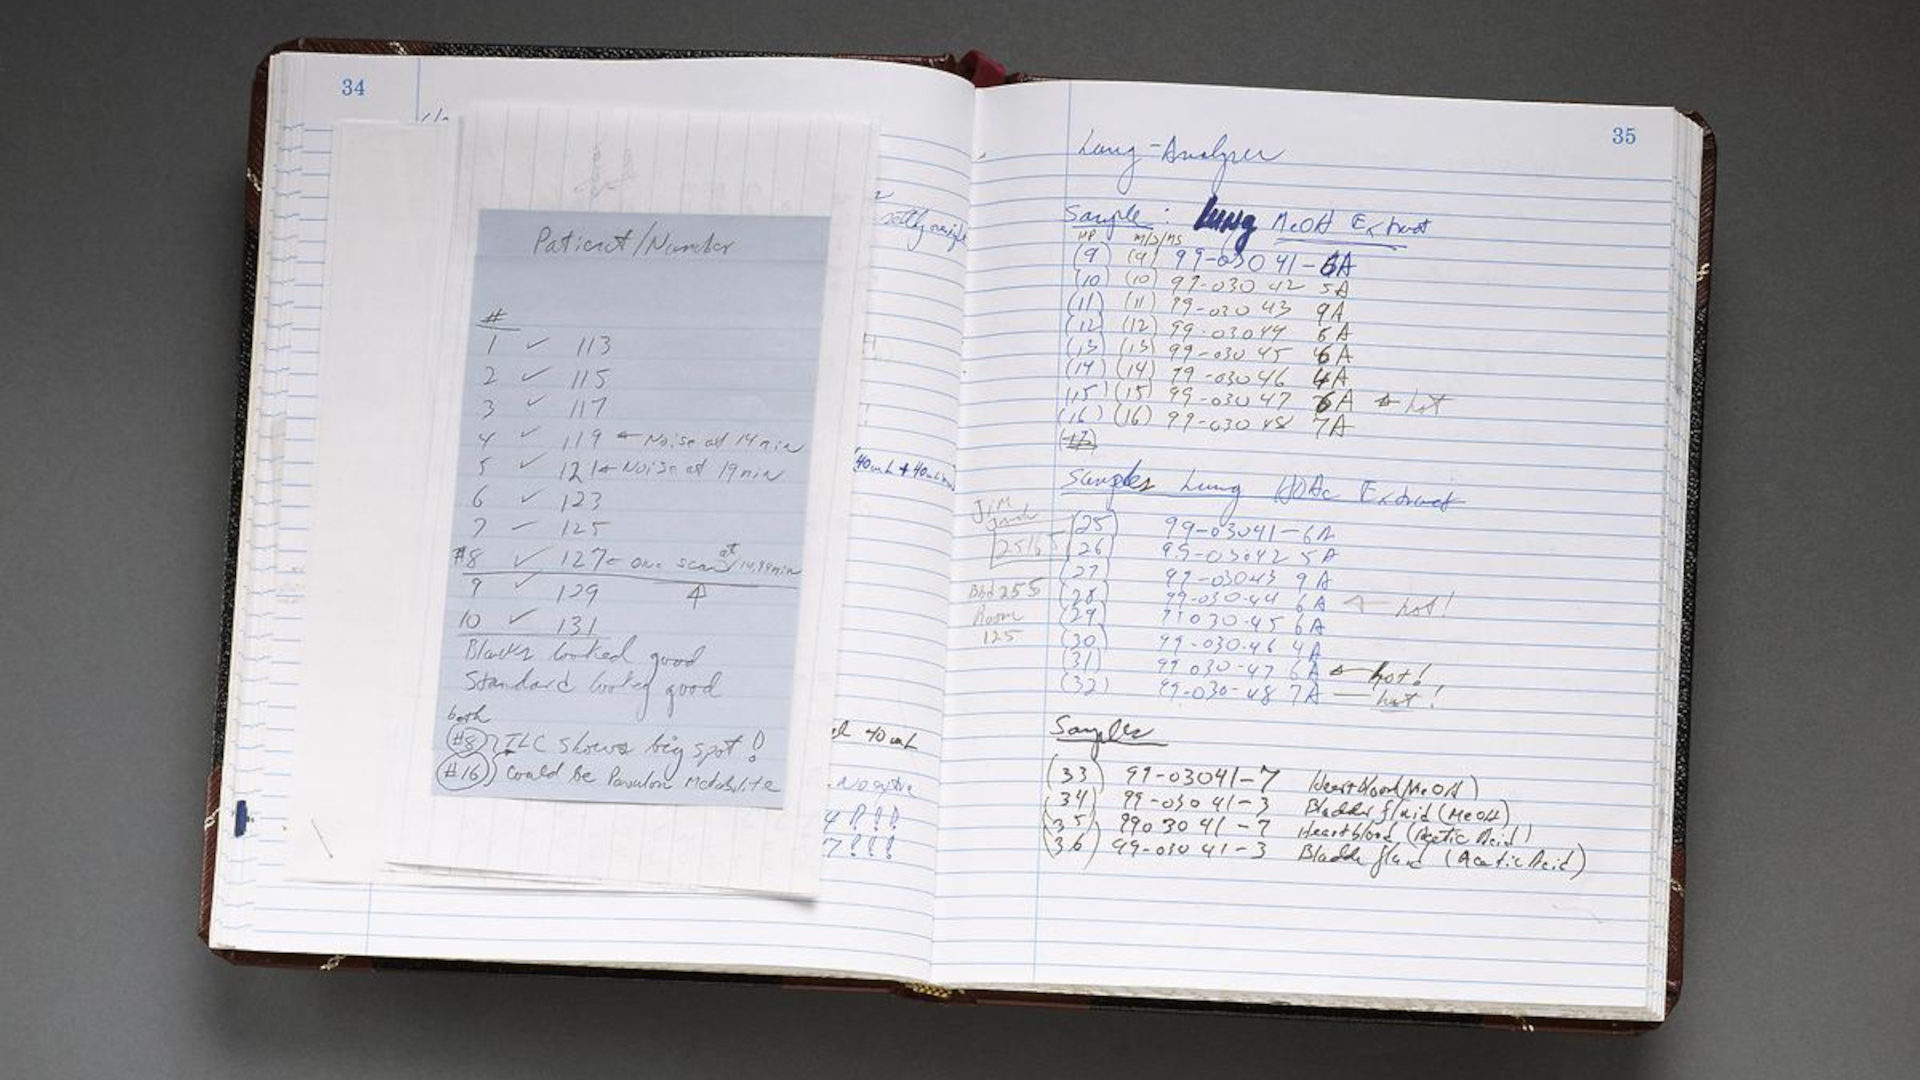 While investigating the Efren Saldivar case, forensic chemist Brian Andresen kept his records and notes in this lab book.